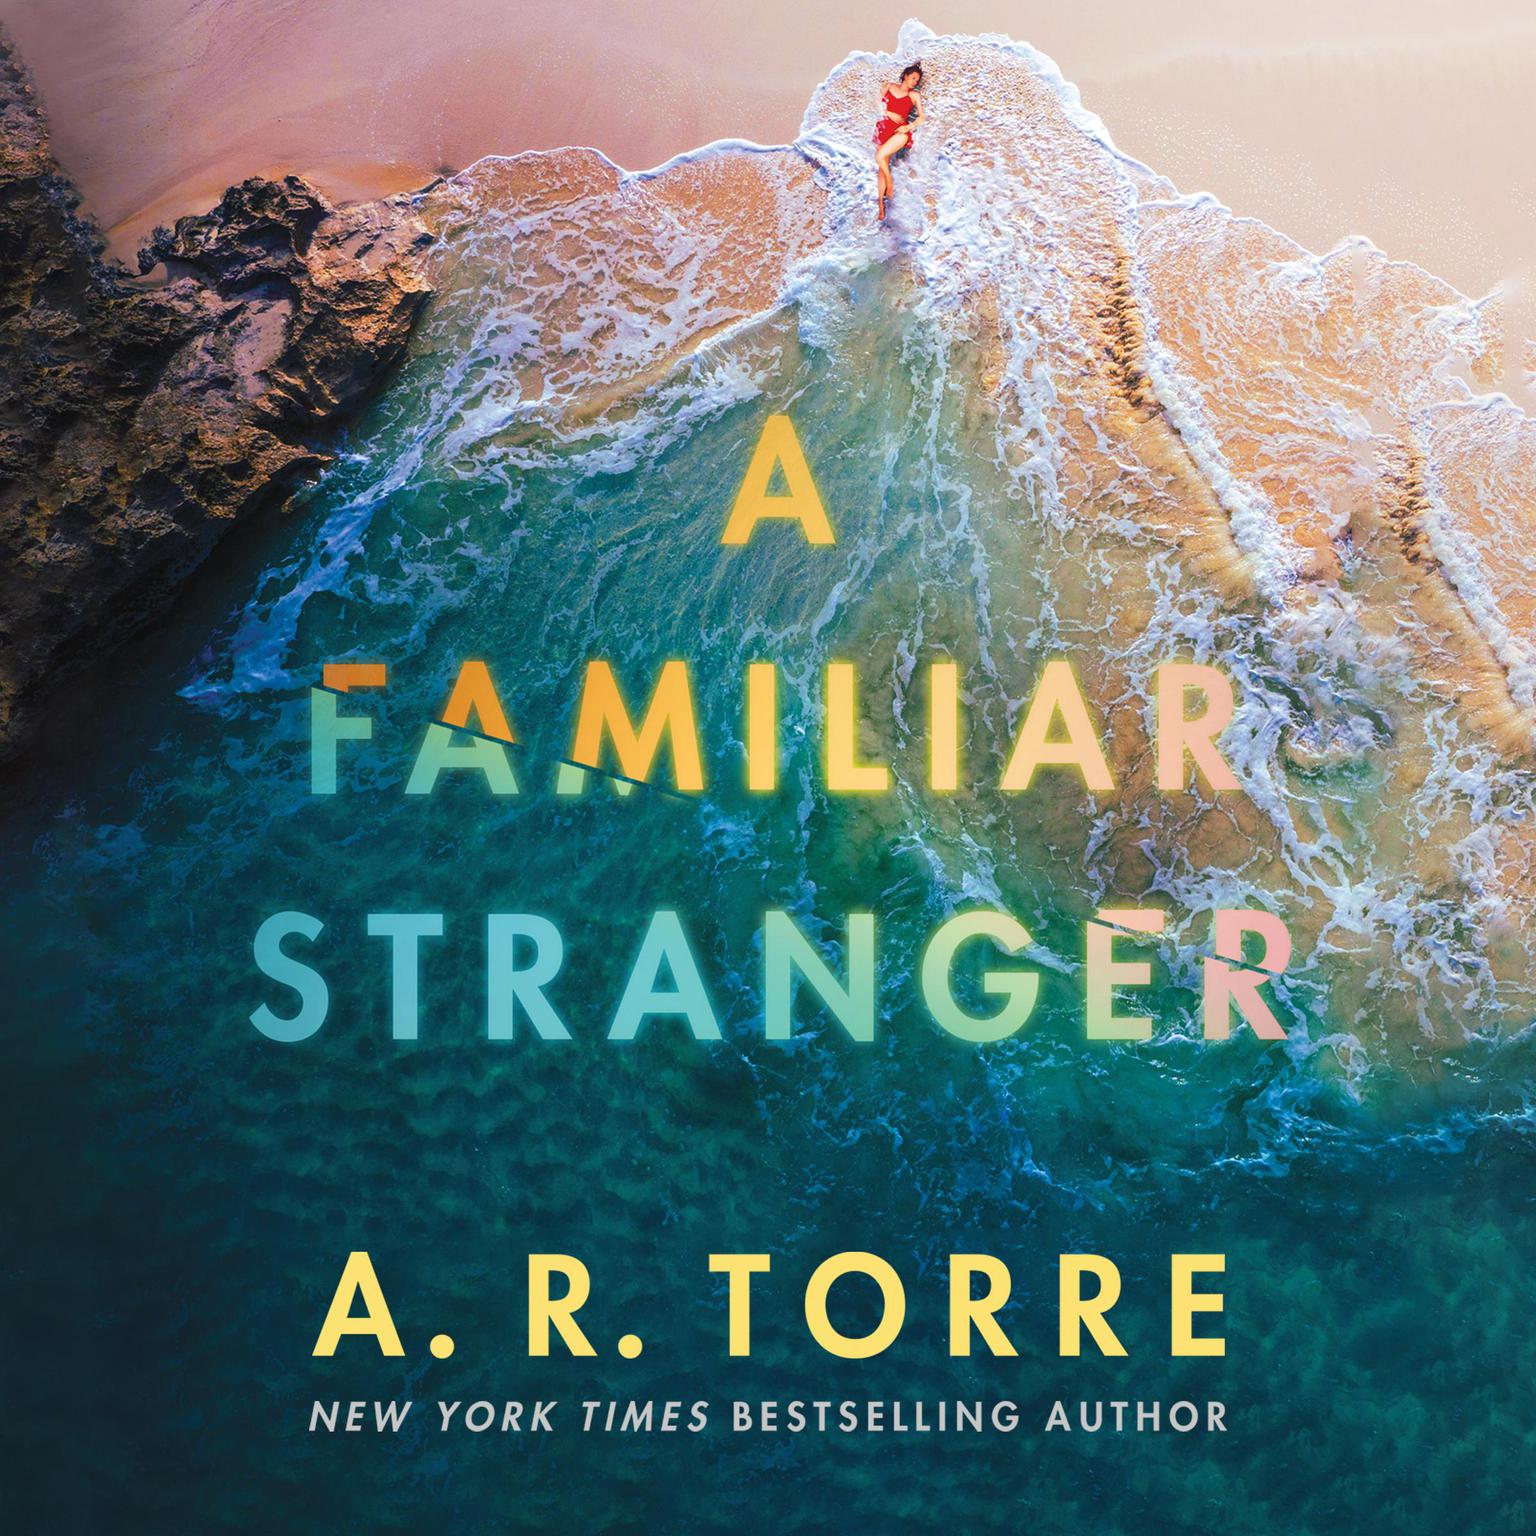 A Familiar Stranger Audiobook, by A. R. Torre